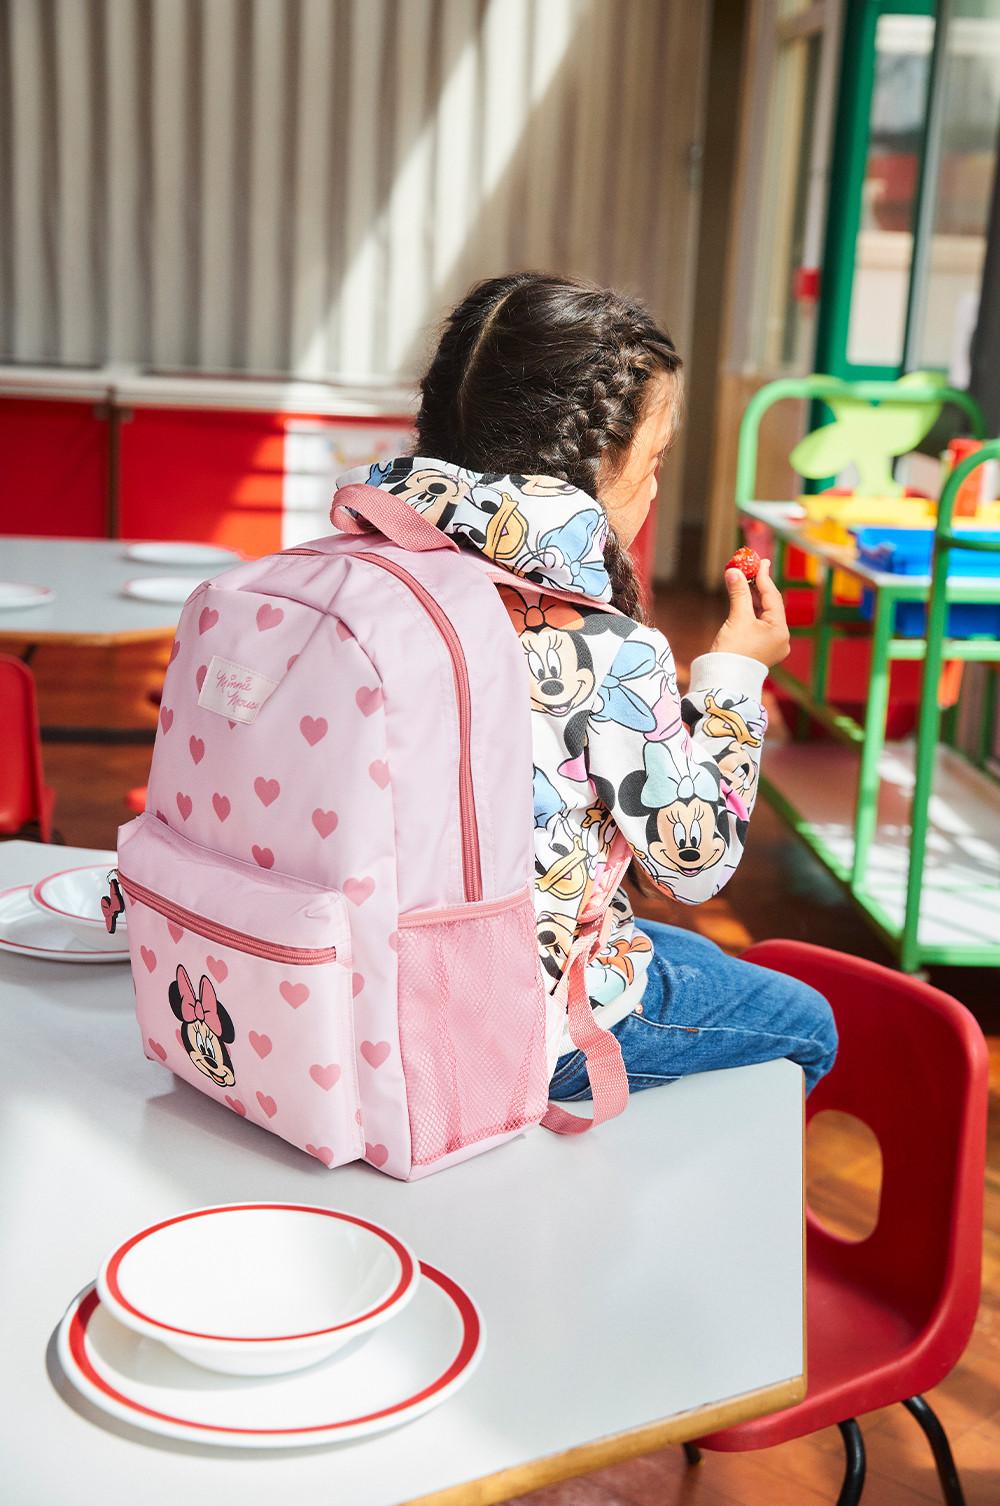 Child wears Minnie Mouse backpack